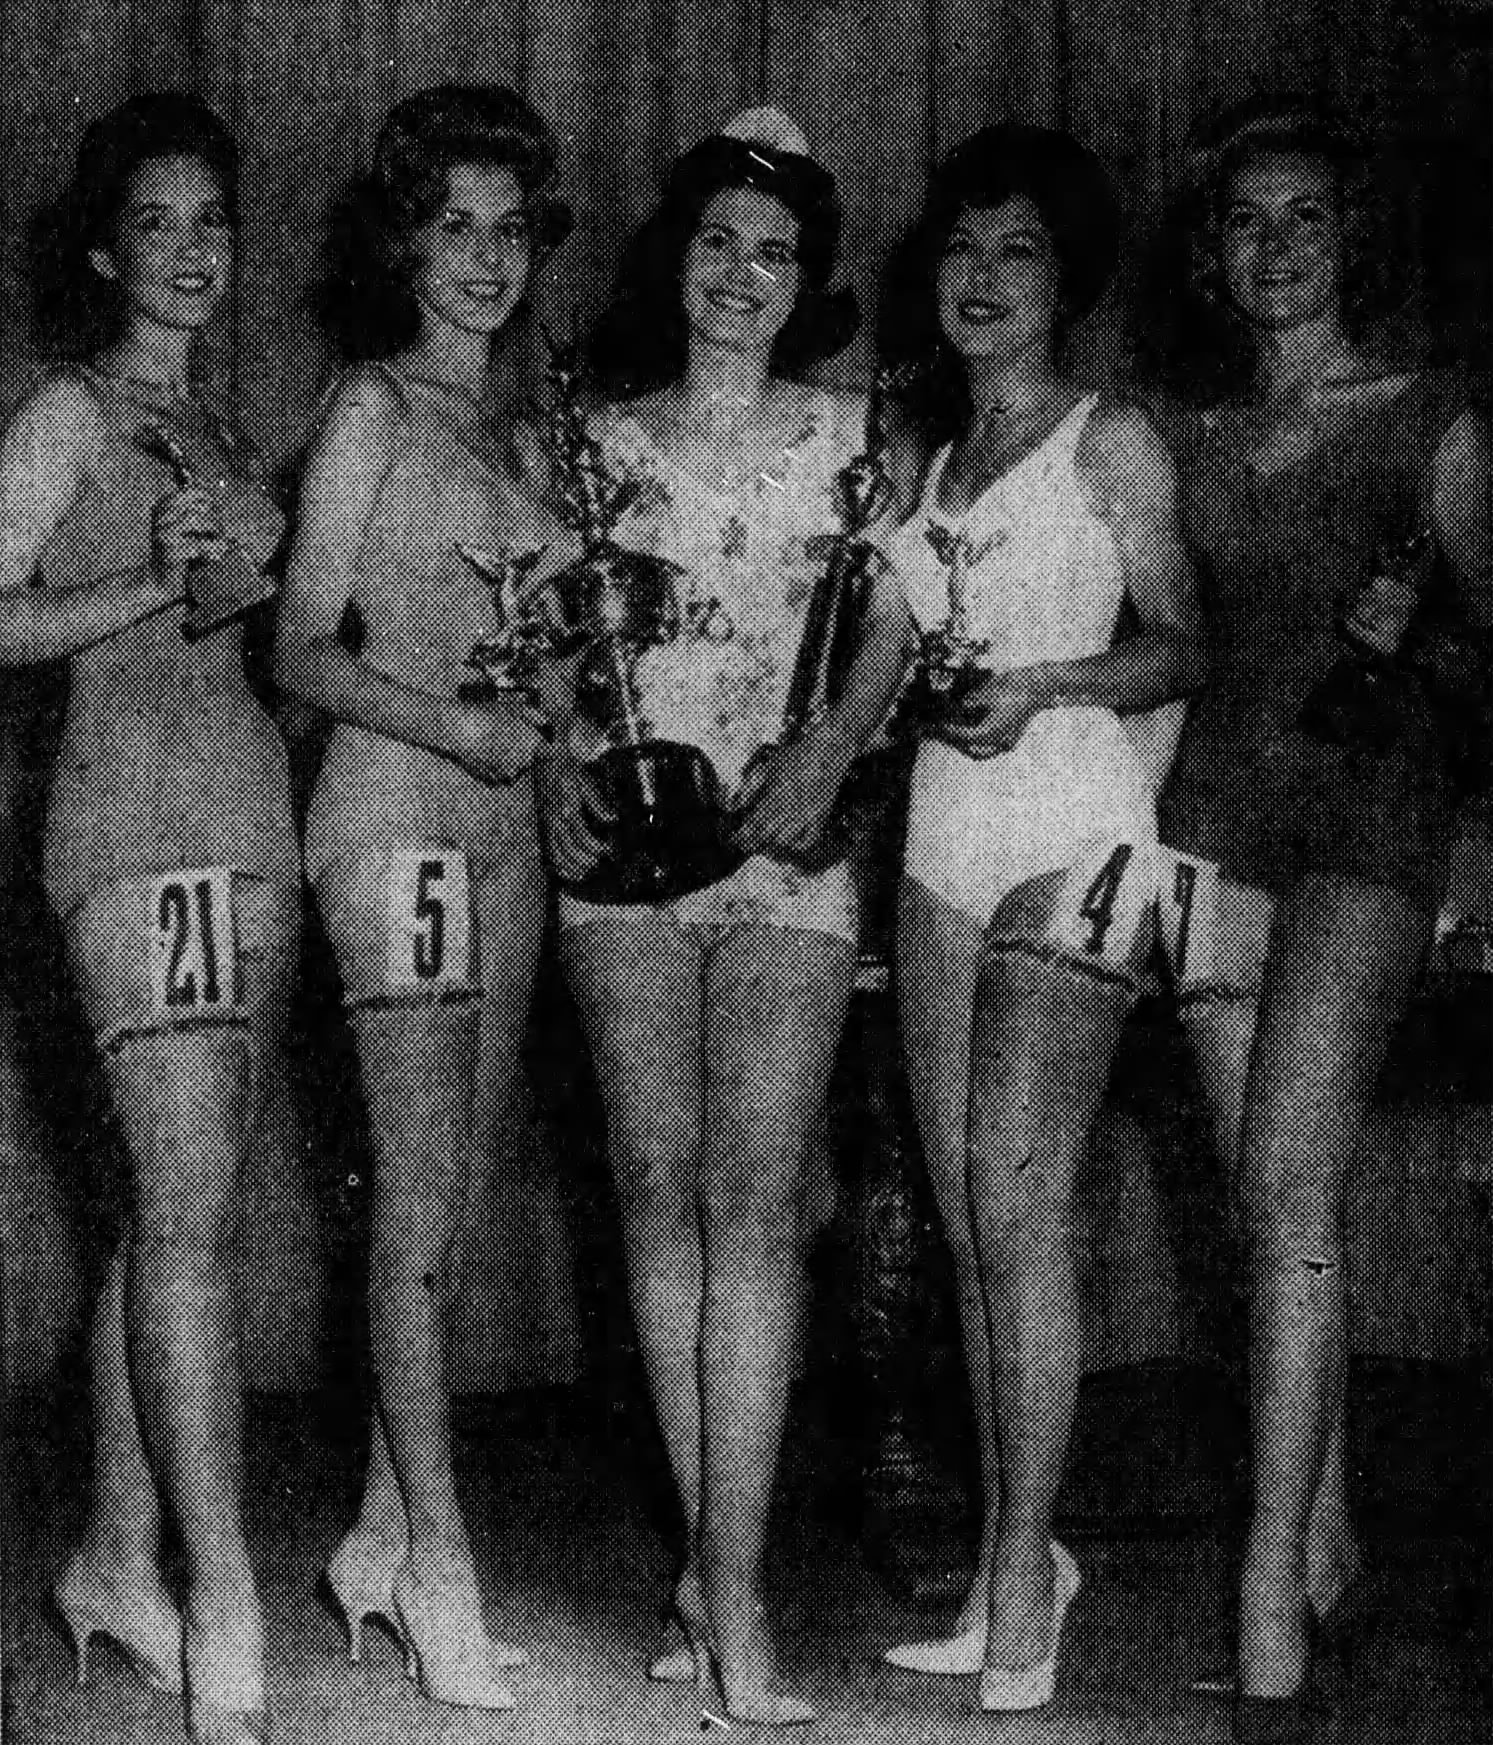 Diane Giersch is crowned Miss New Jersey USA 1961